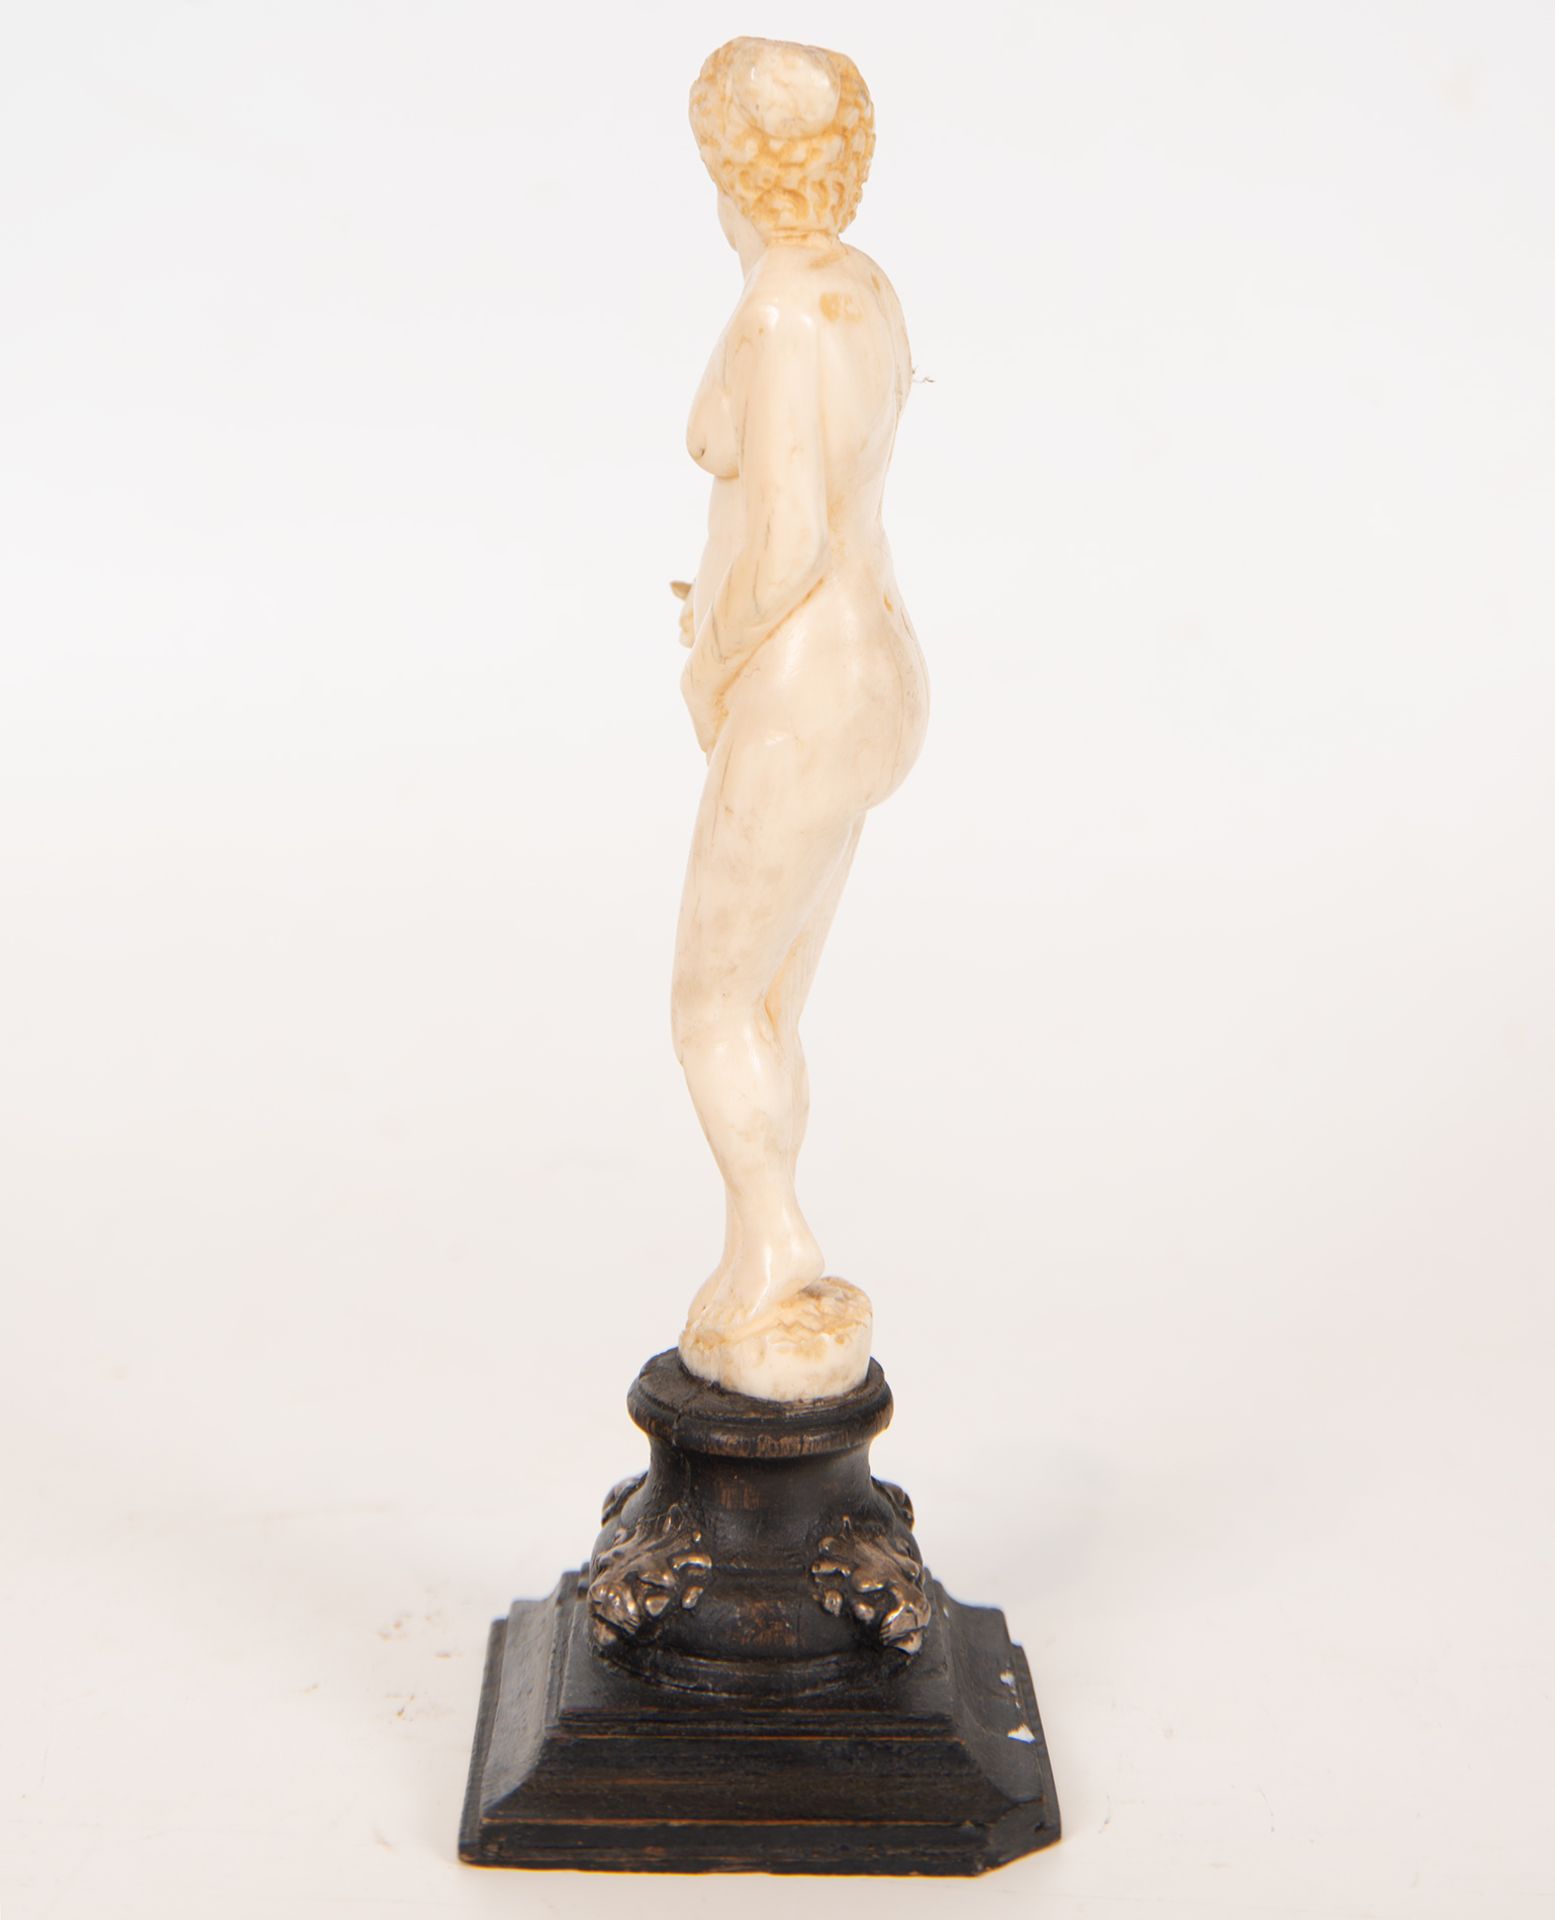 Aphrodite in Ivory, 17th century Flemish work - Image 4 of 9